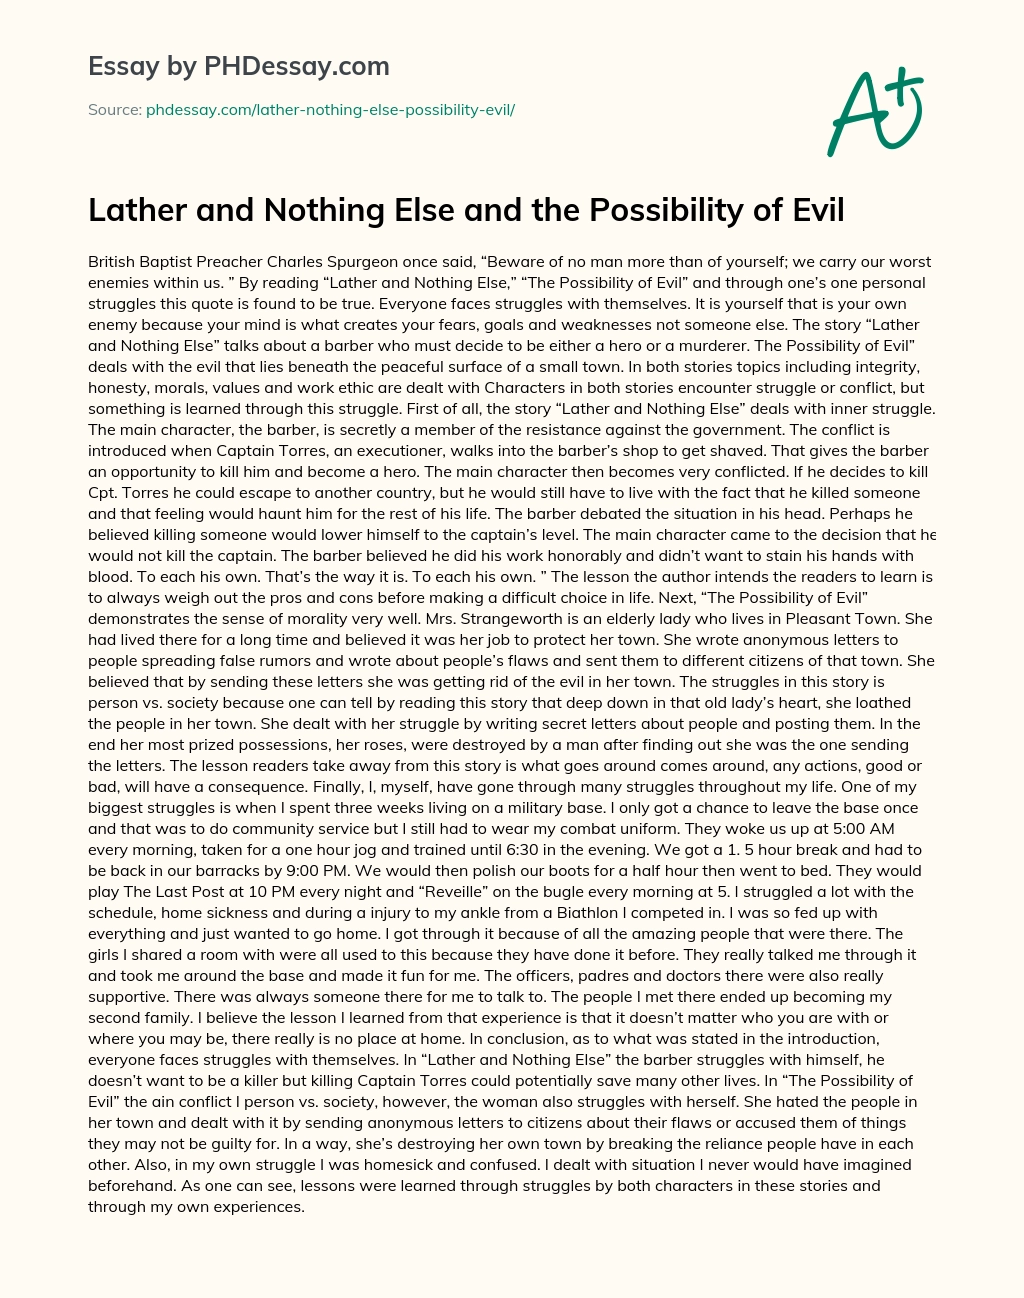 Lather and Nothing Else and the Possibility of Evil essay